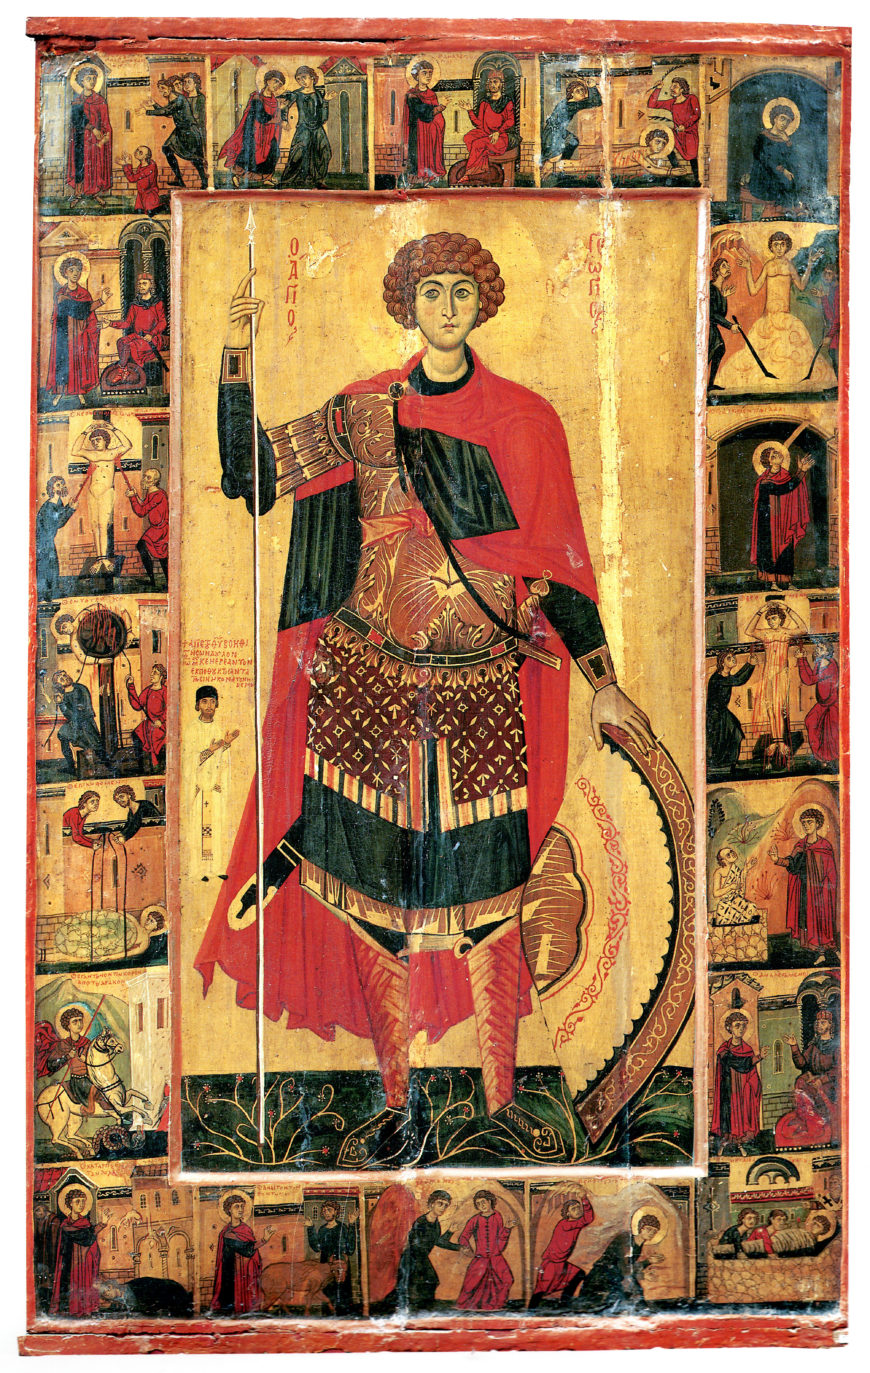 Vita icon of St. George, late 12th or early 13th century, Monastery of St. Catherine, Sinai, Egypt